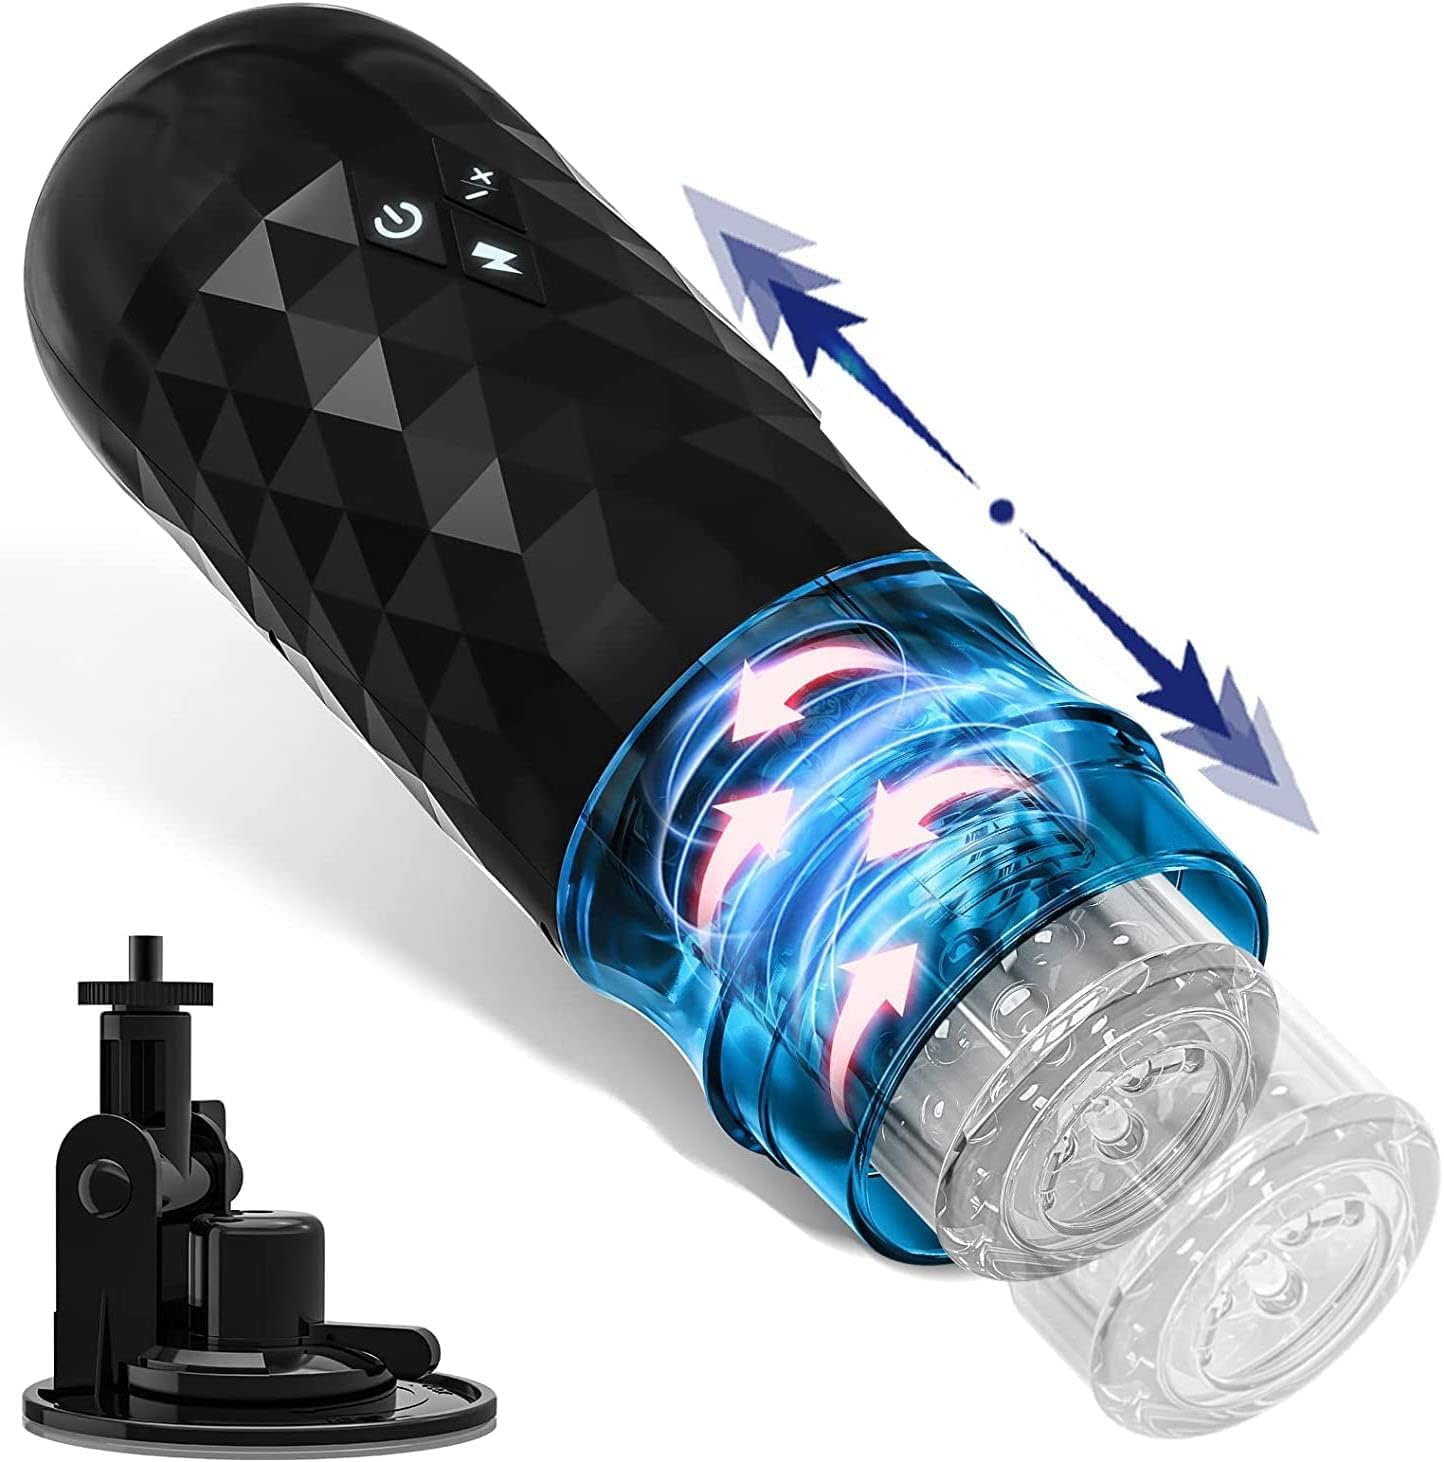 Electric Mastubrator Sex Toy for Men 7 thrust and rotation functions